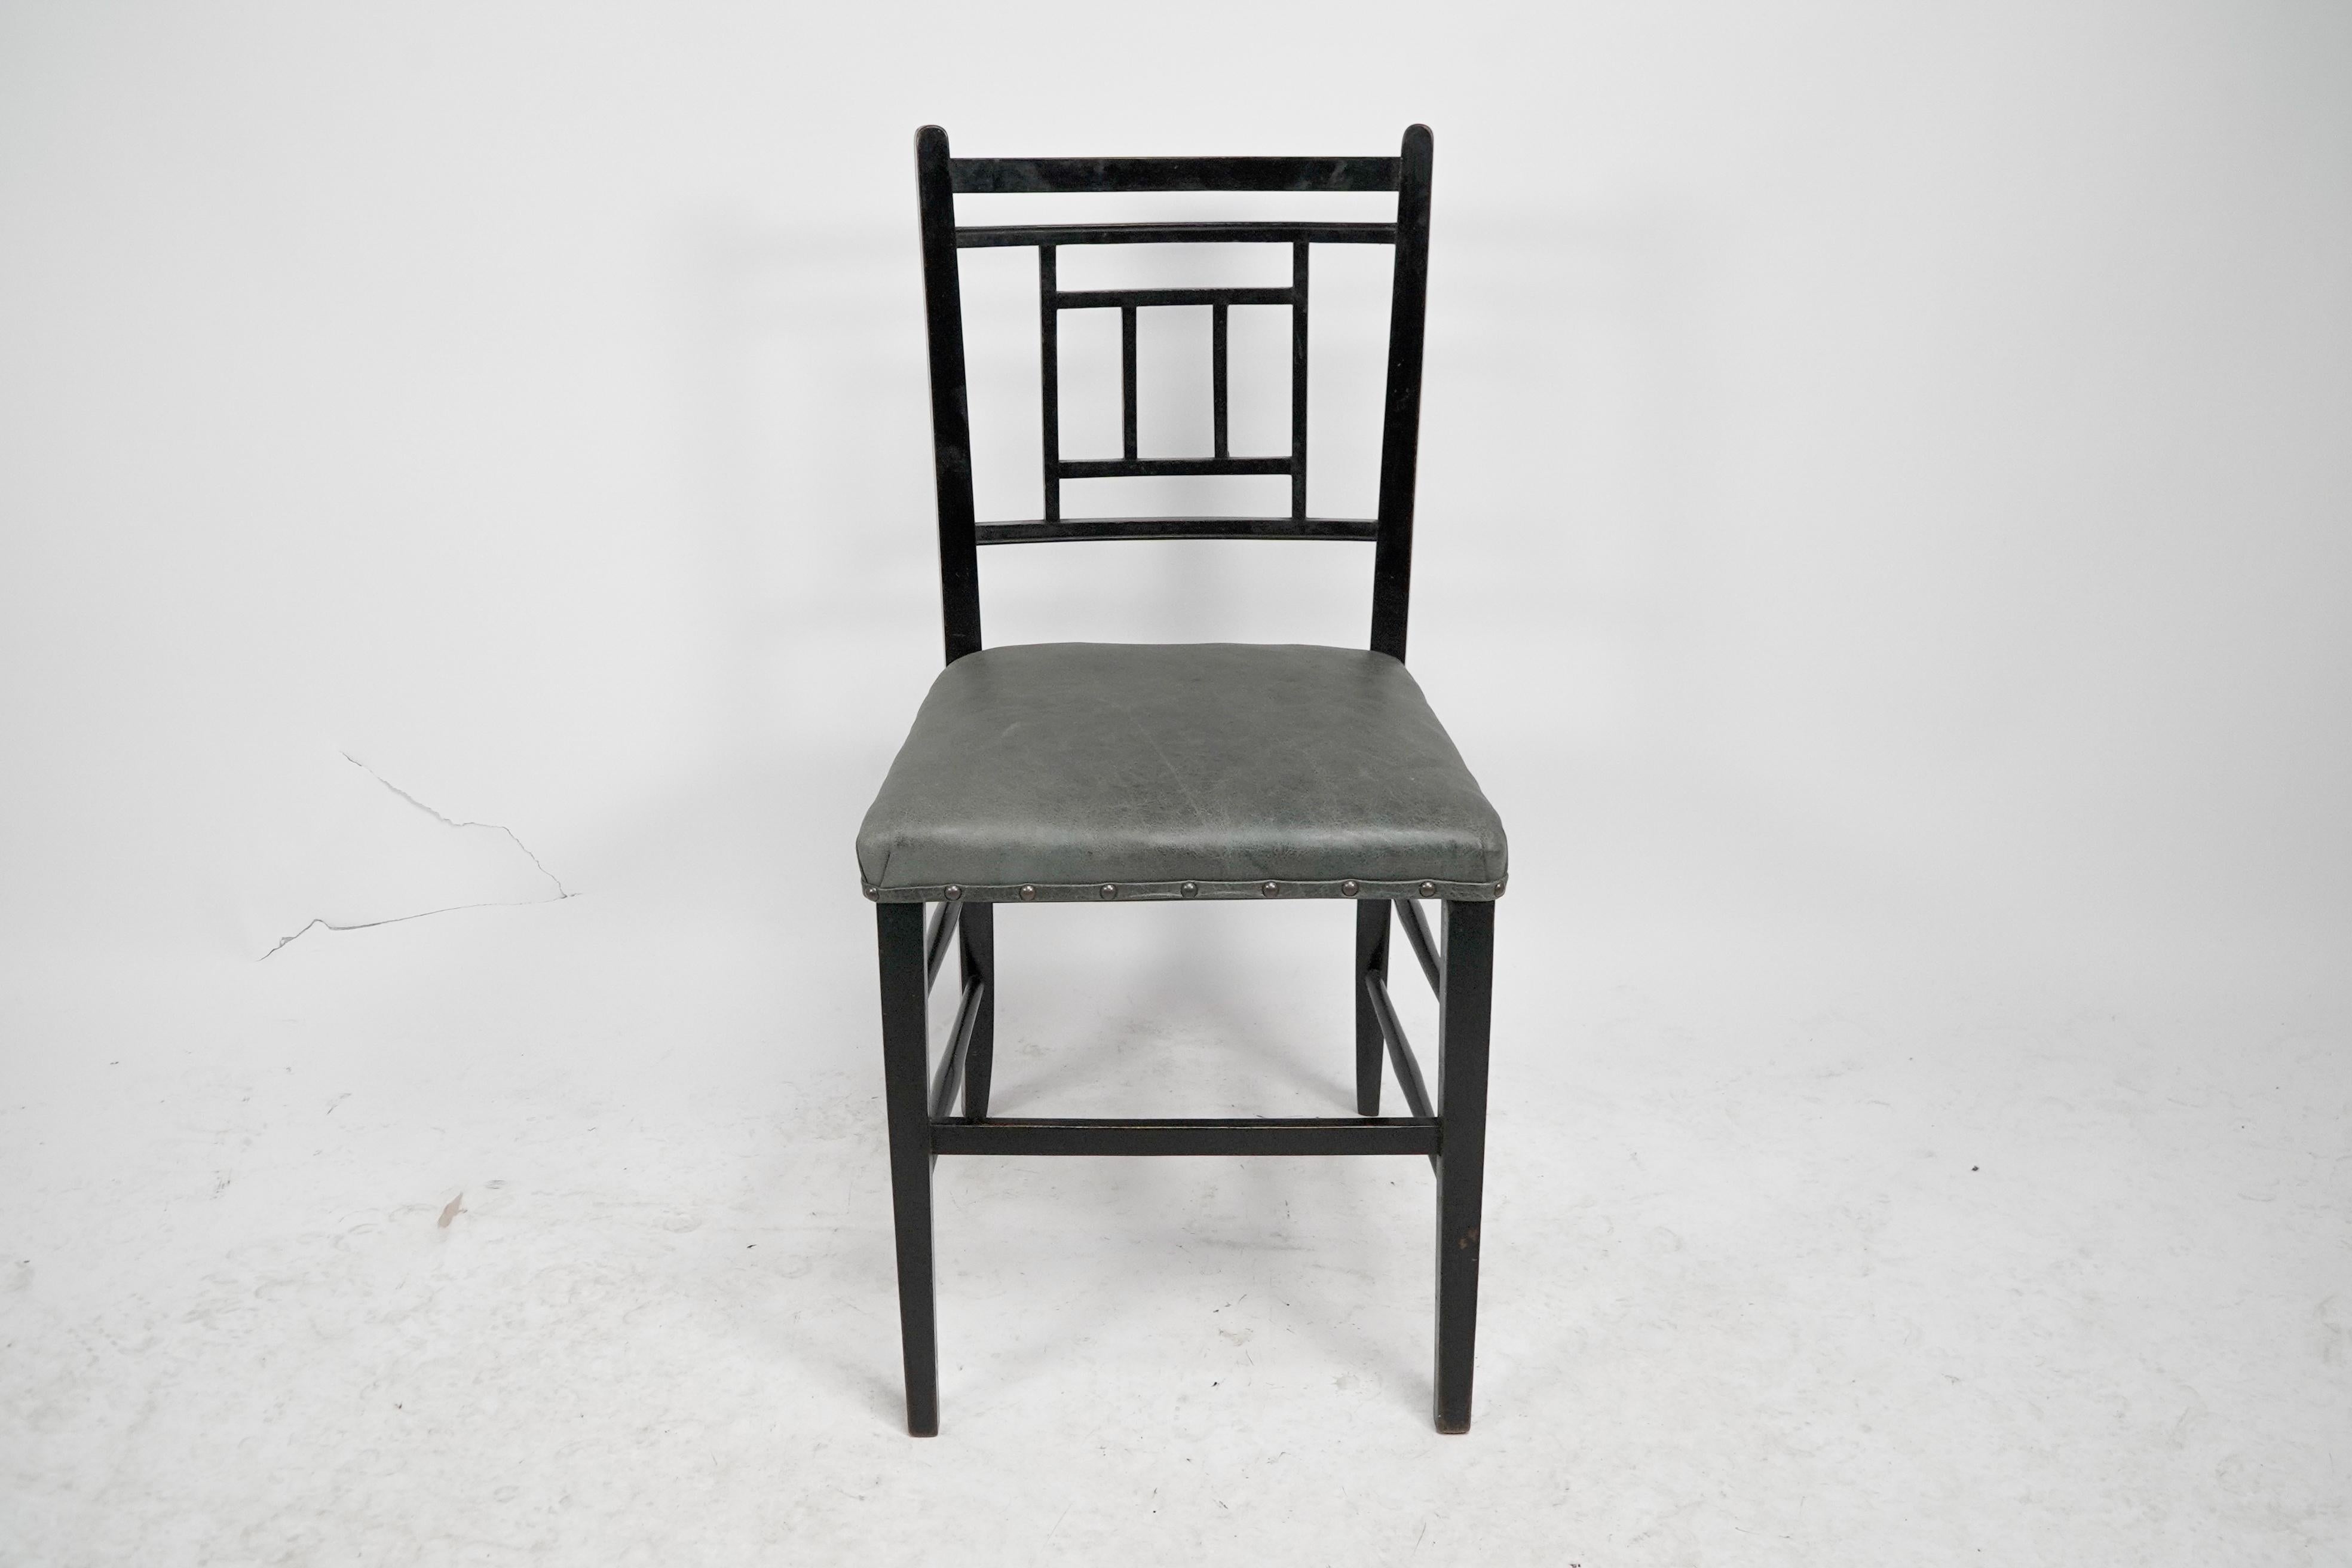 E.W. Godwin, style of An anglo japanese ebonized side chair with professionally upholstered seat in a quality hide
